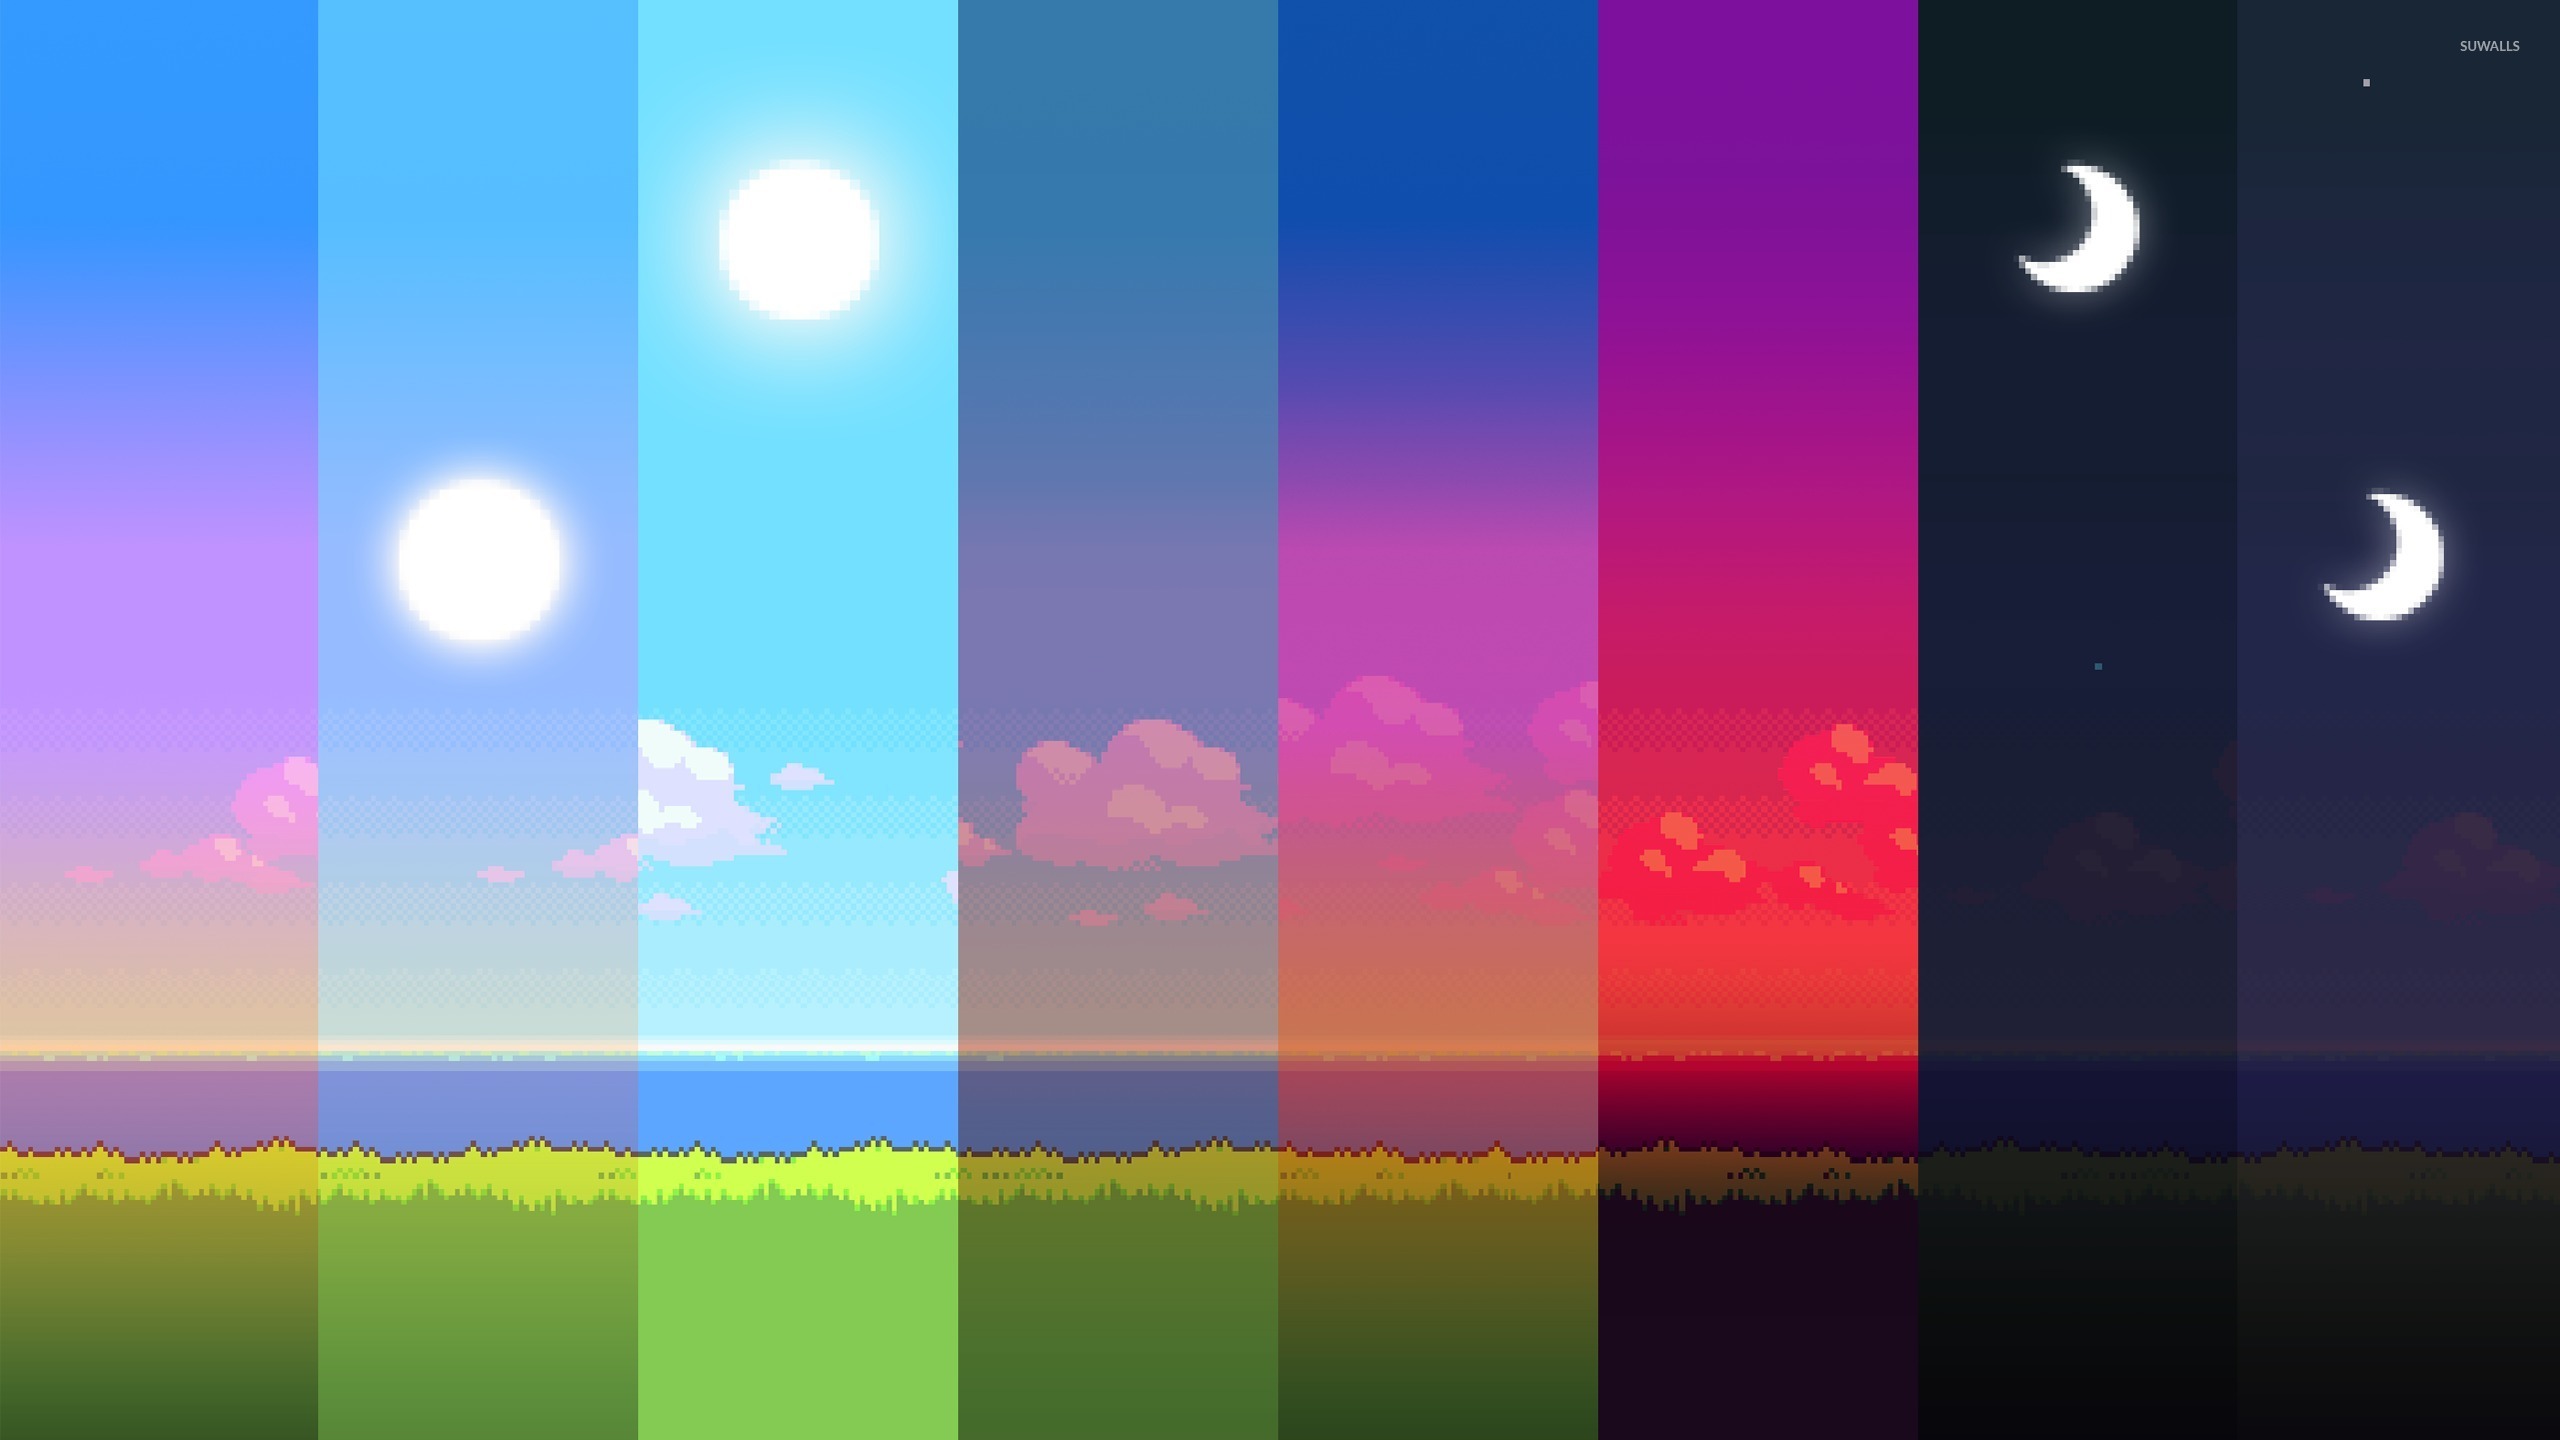 Slices of a day in 8 bit wallpaper.